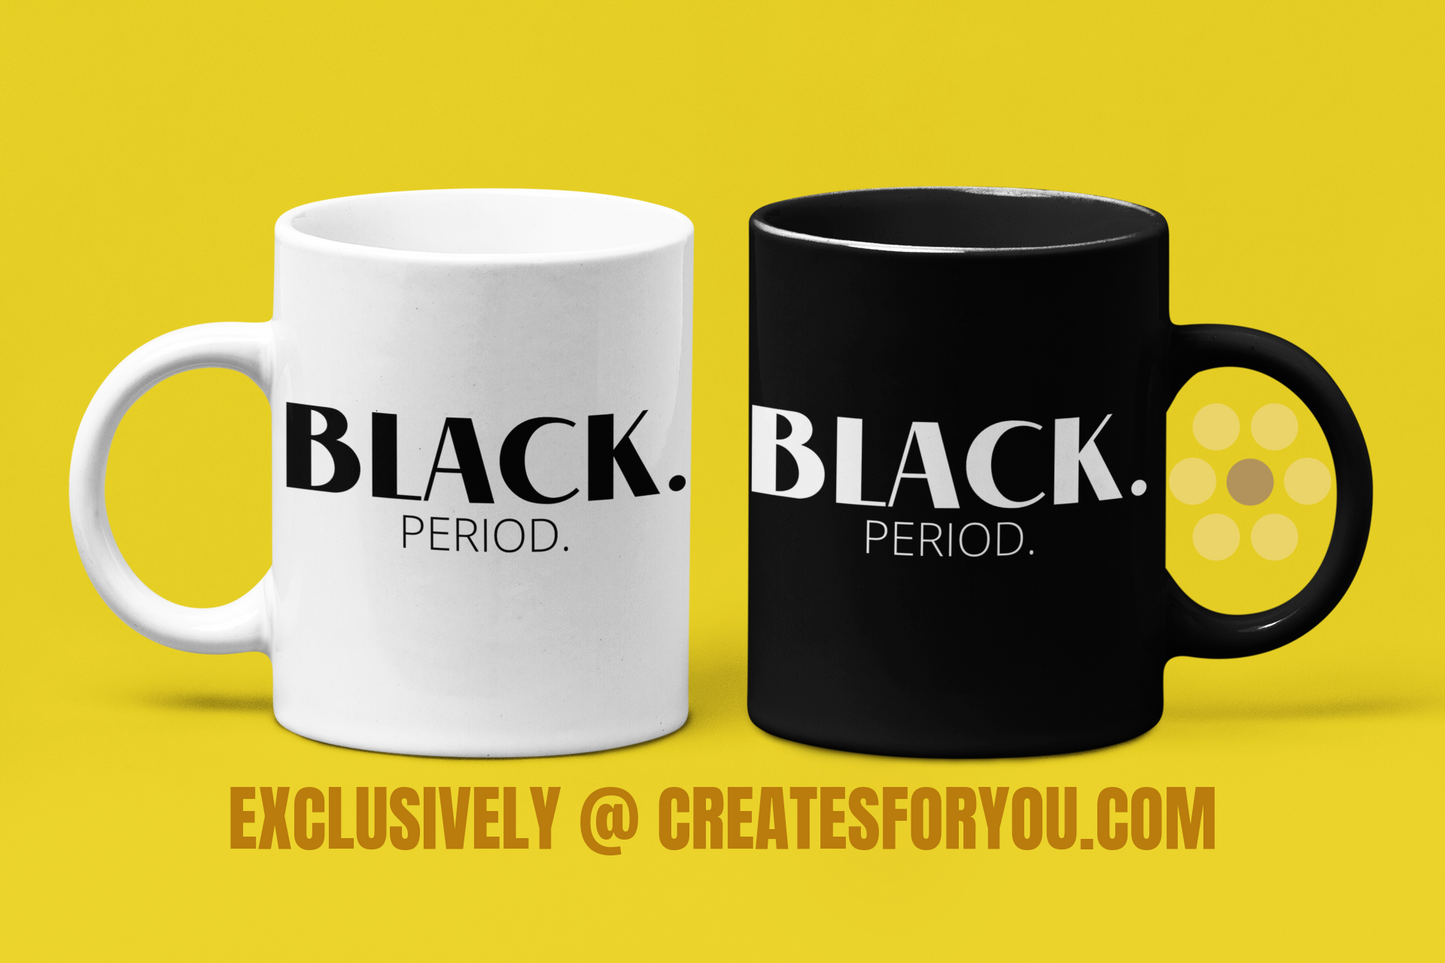 "BLACK. PERIOD" Juneteenth Mugs: Empower Every Sip with Black History